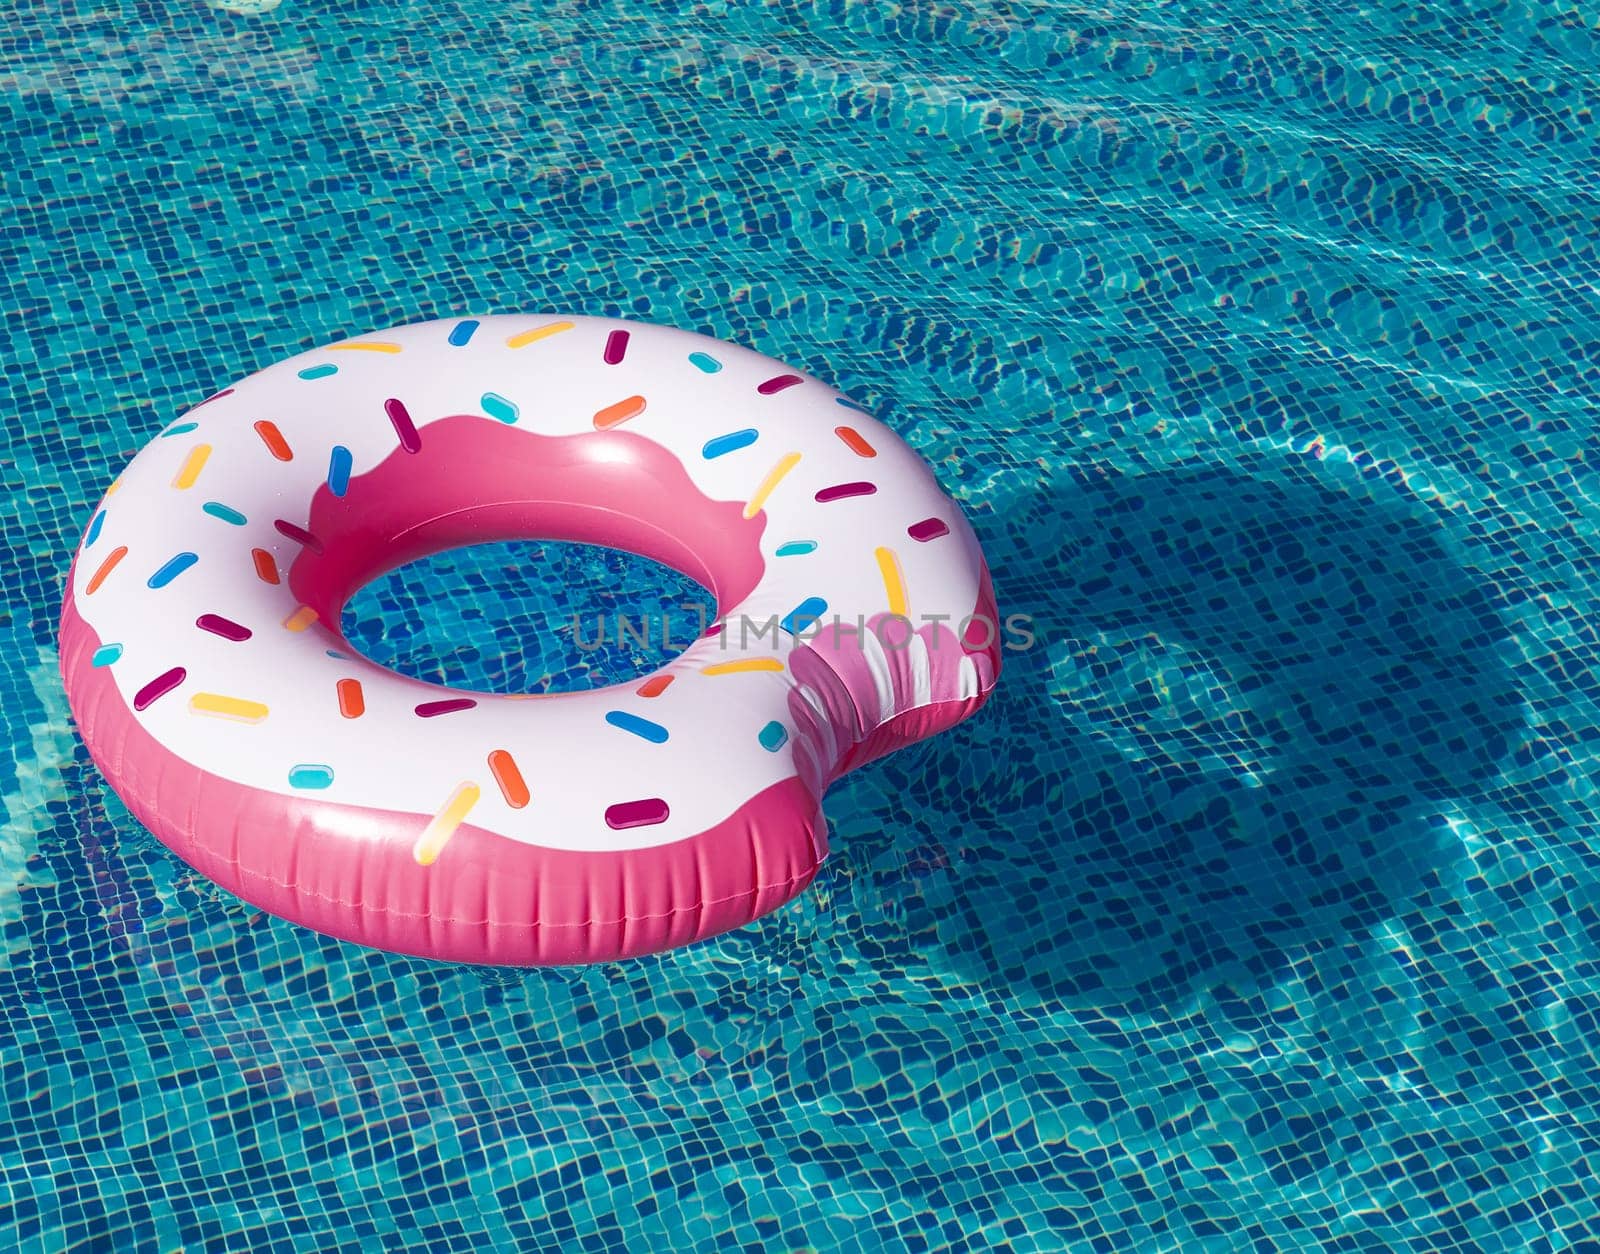 Whimsical inflatable ring, fashioned after a doughnut, rests atop the serene swimming pool